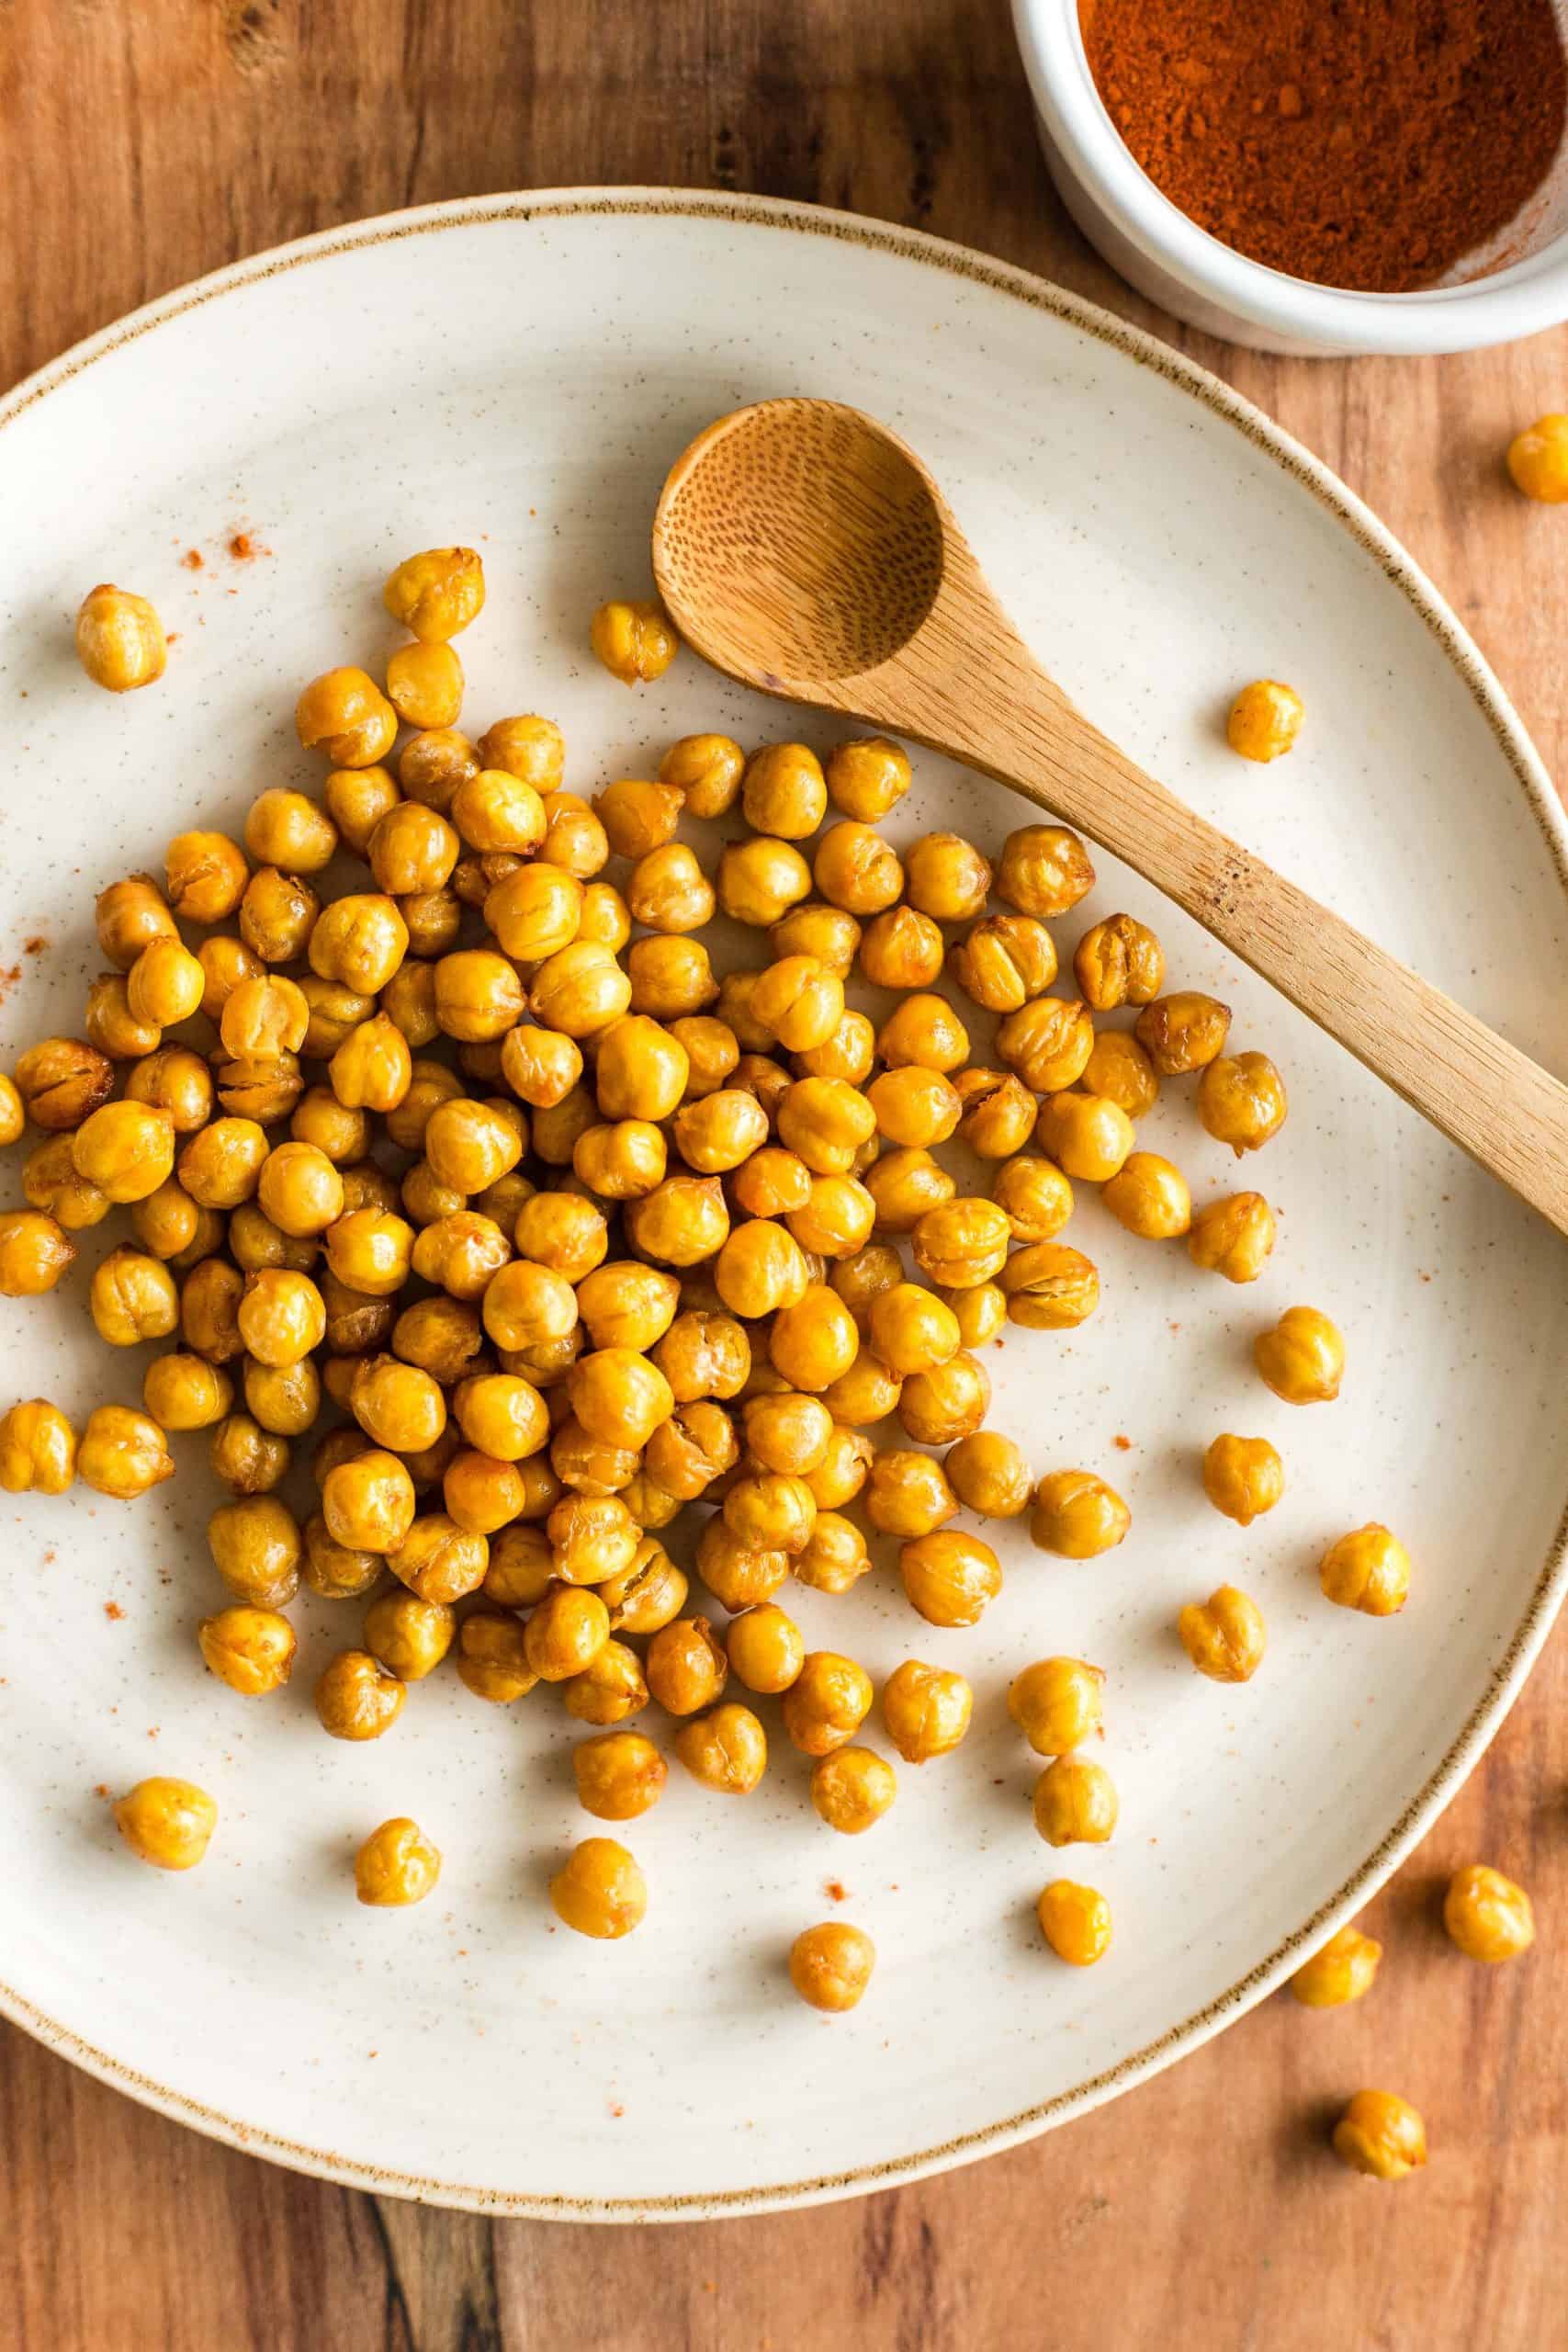 Crispy vegan air fryer chickpeas and a wooden spoon on a plate.